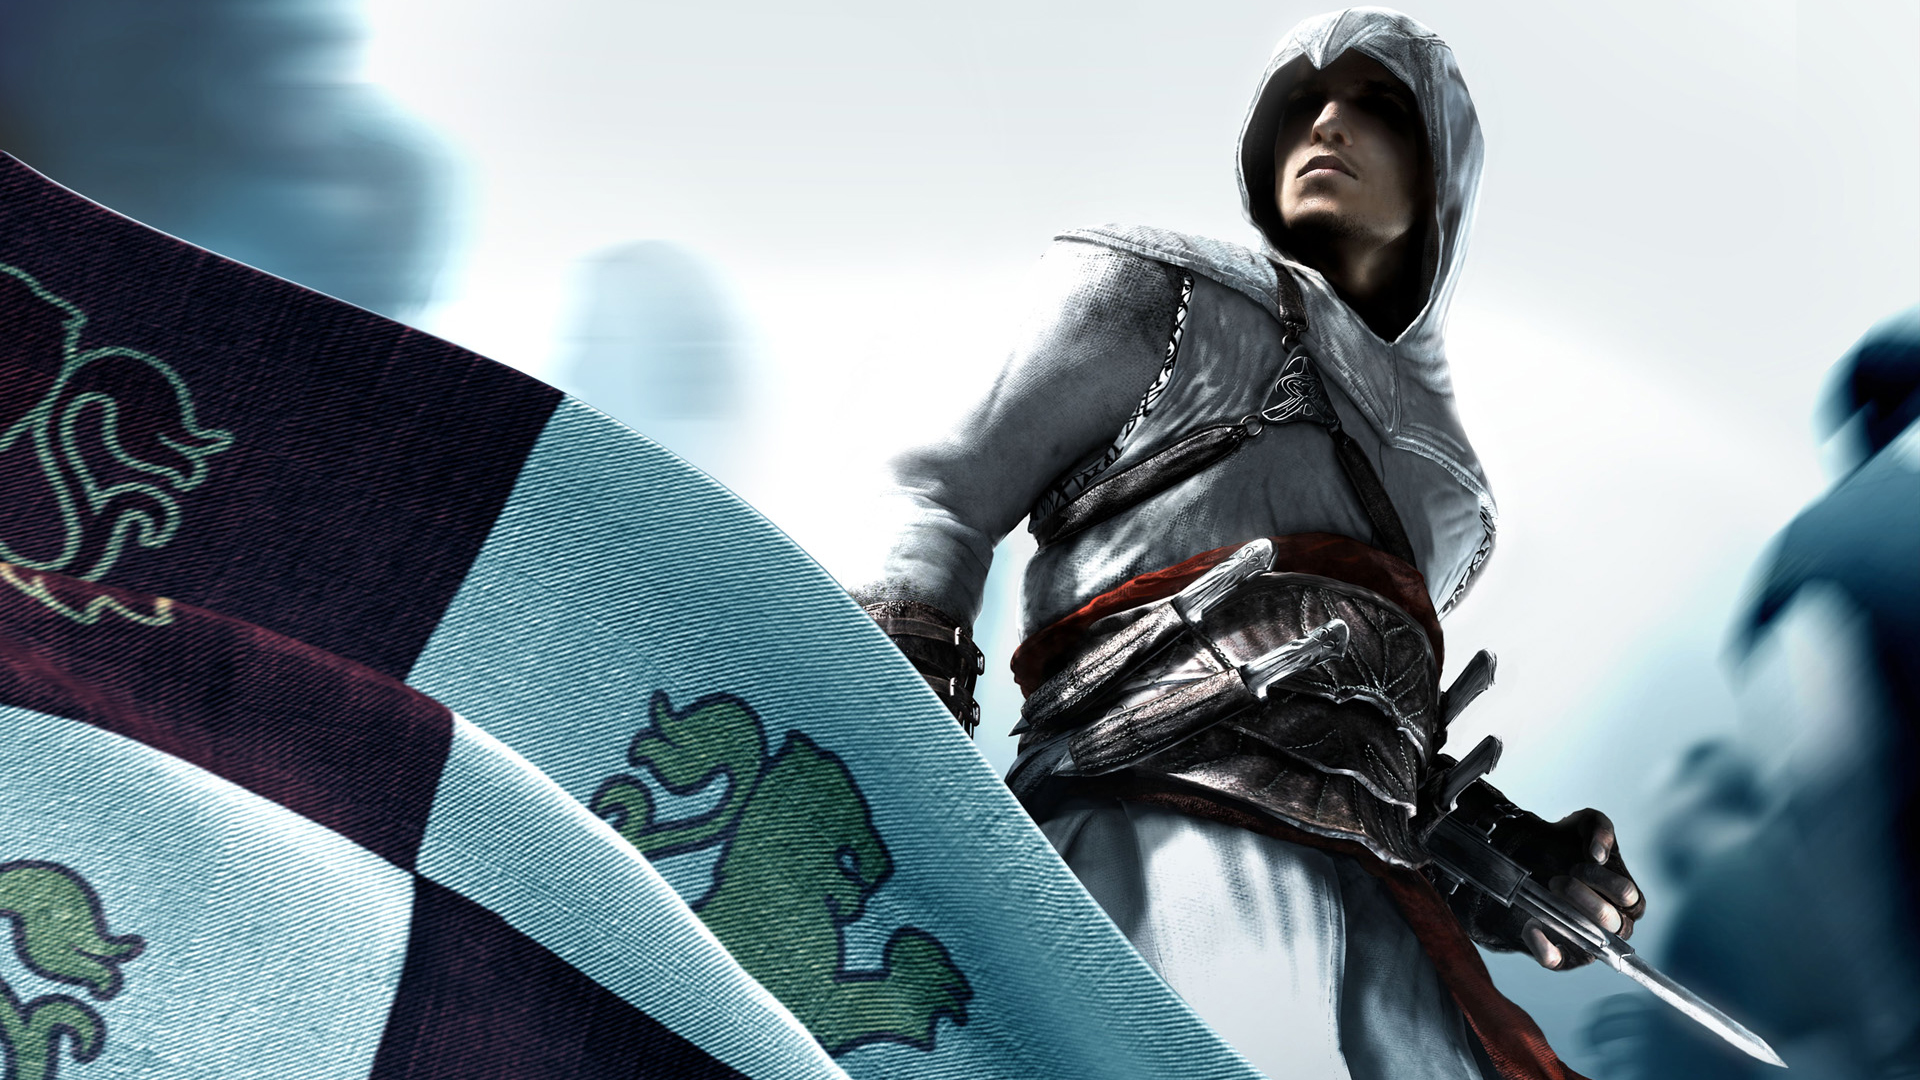 assassin's creed, video game, altair (assassin's creed)